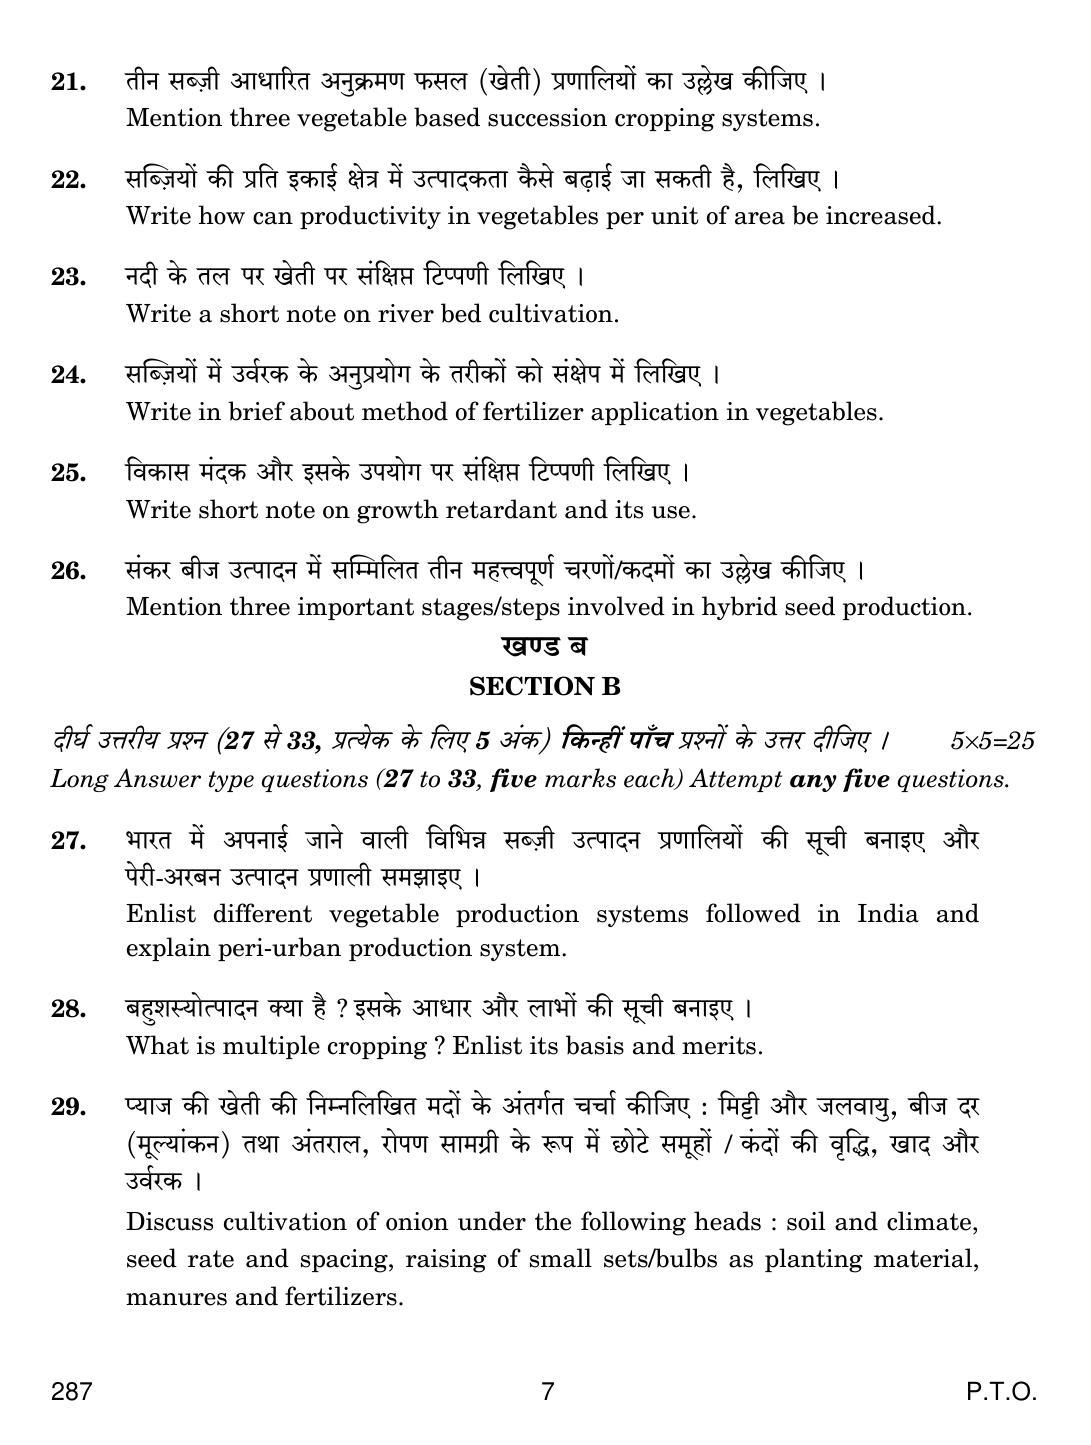 CBSE Class 12 287 Olericulture 2019 Question Paper - Page 7